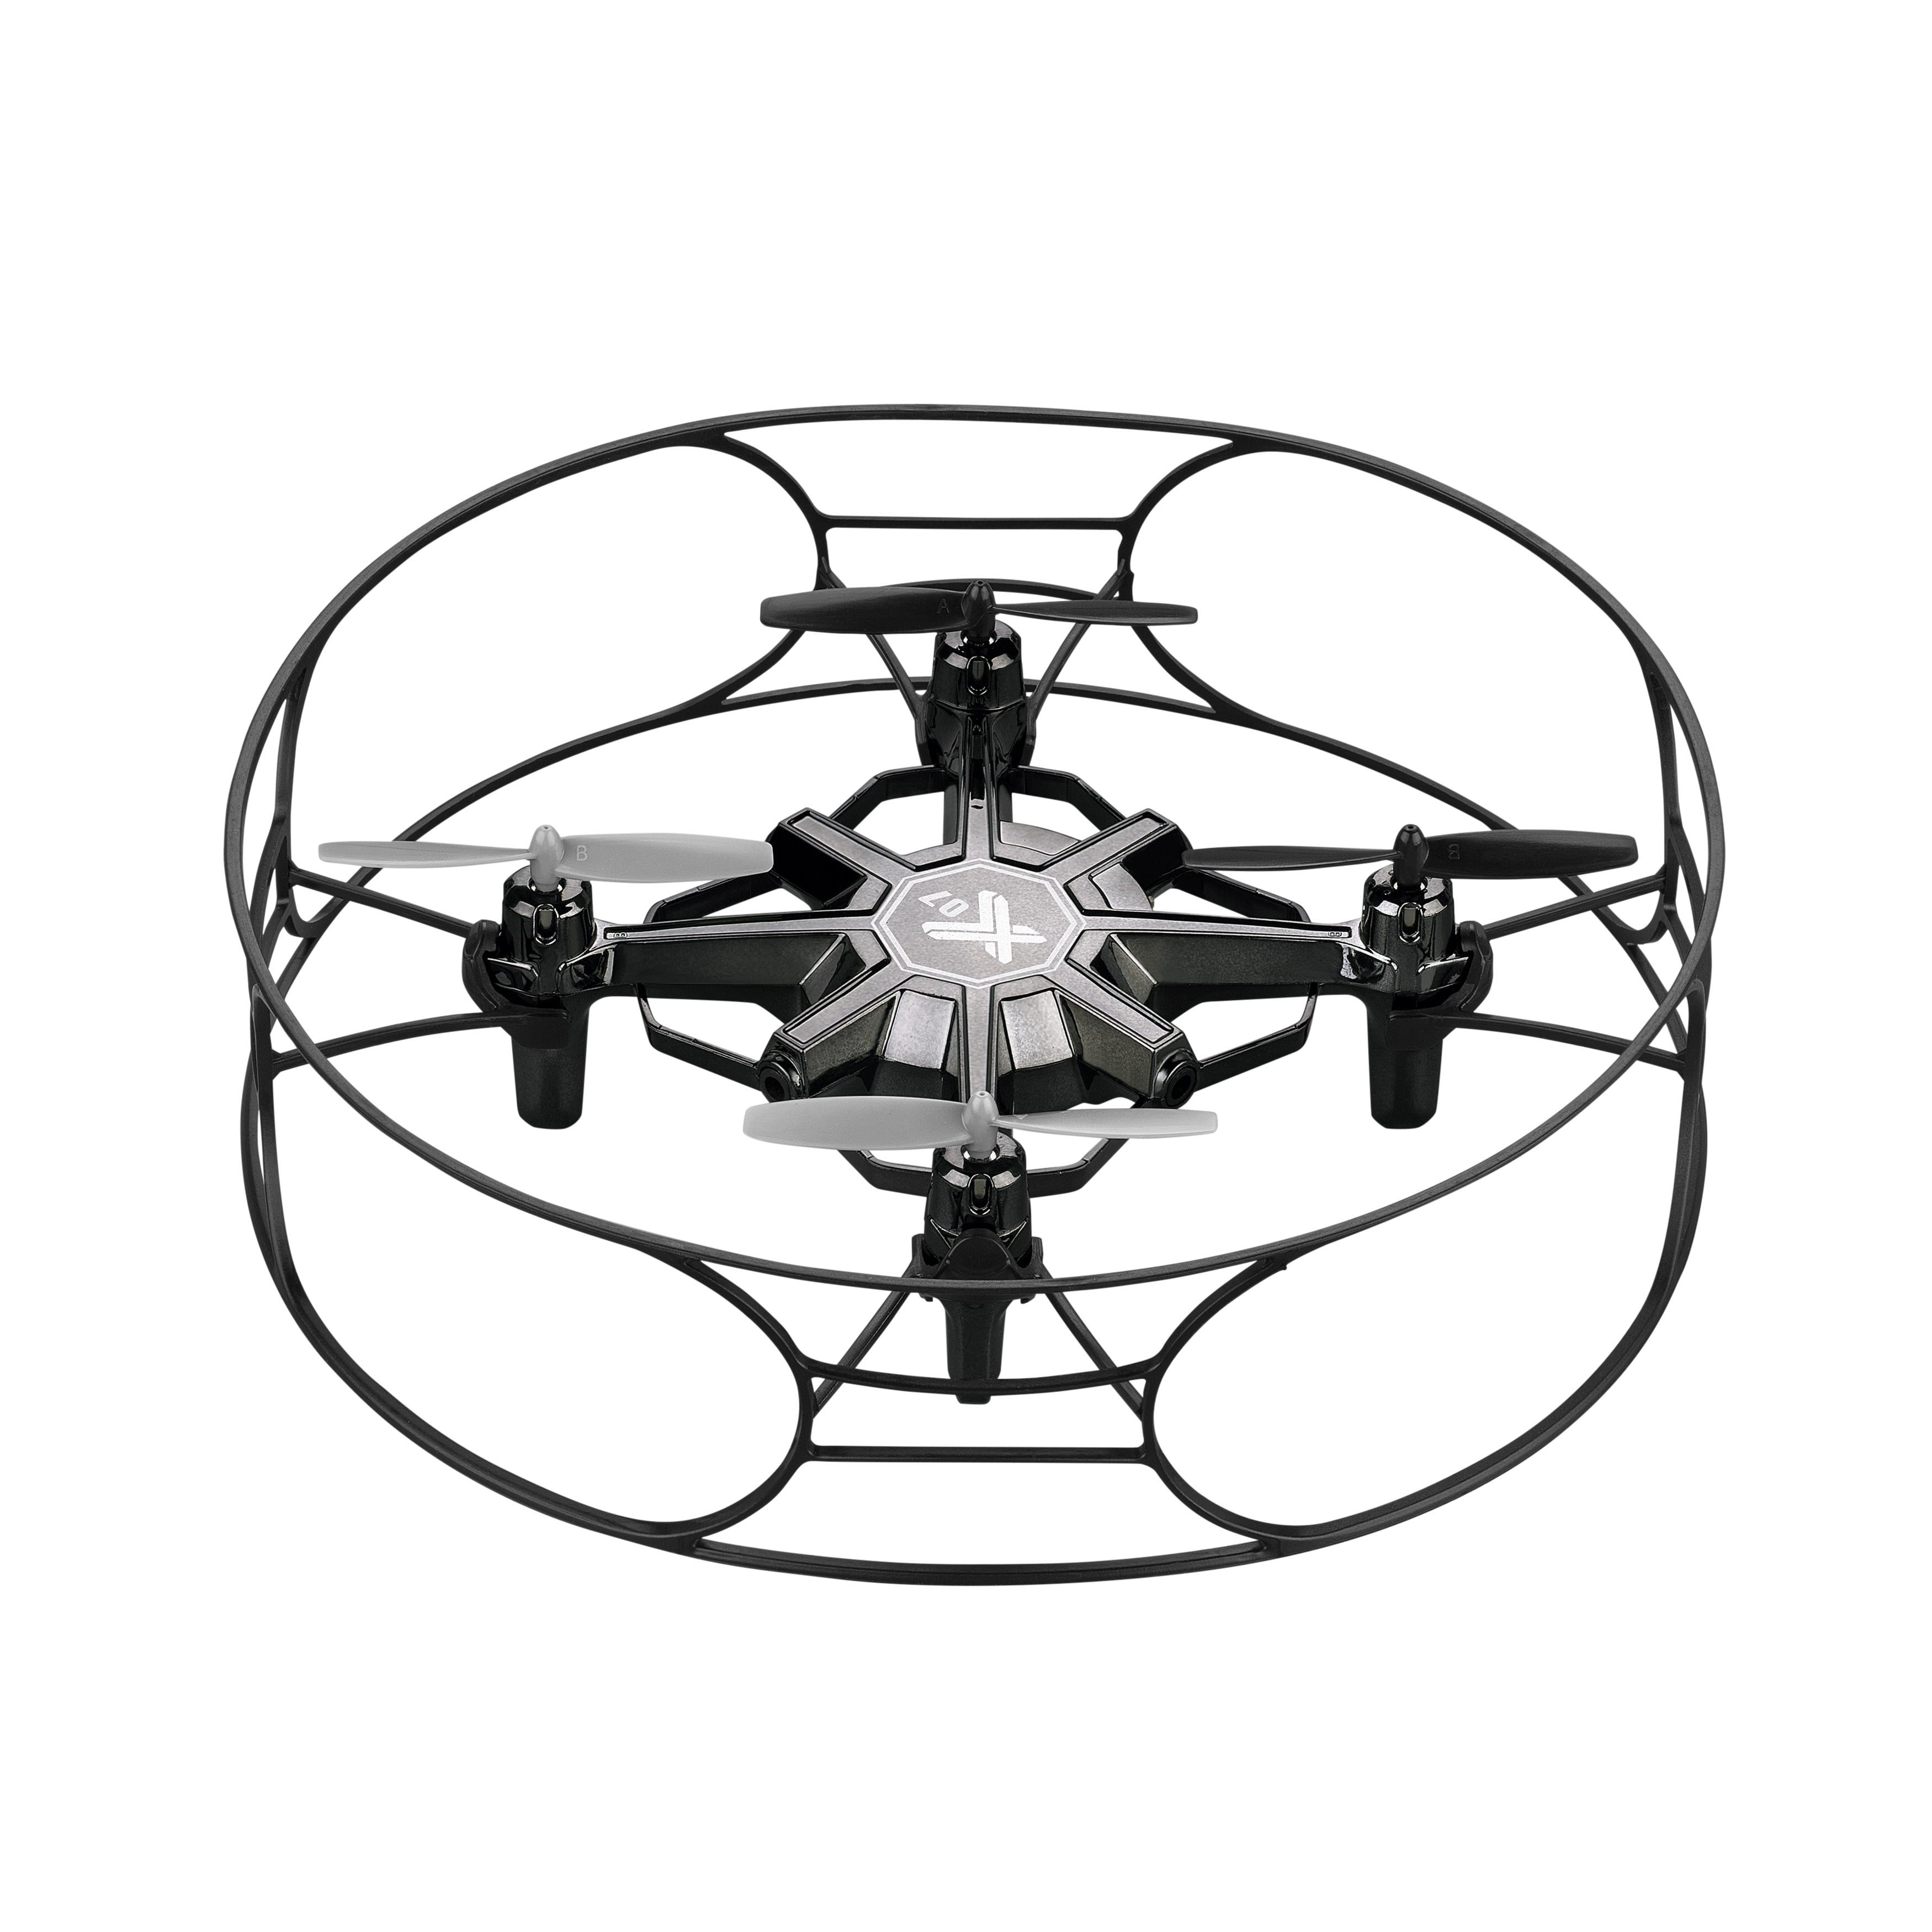 Propel Maximum X07 Drone Manual - Picture Of Drone